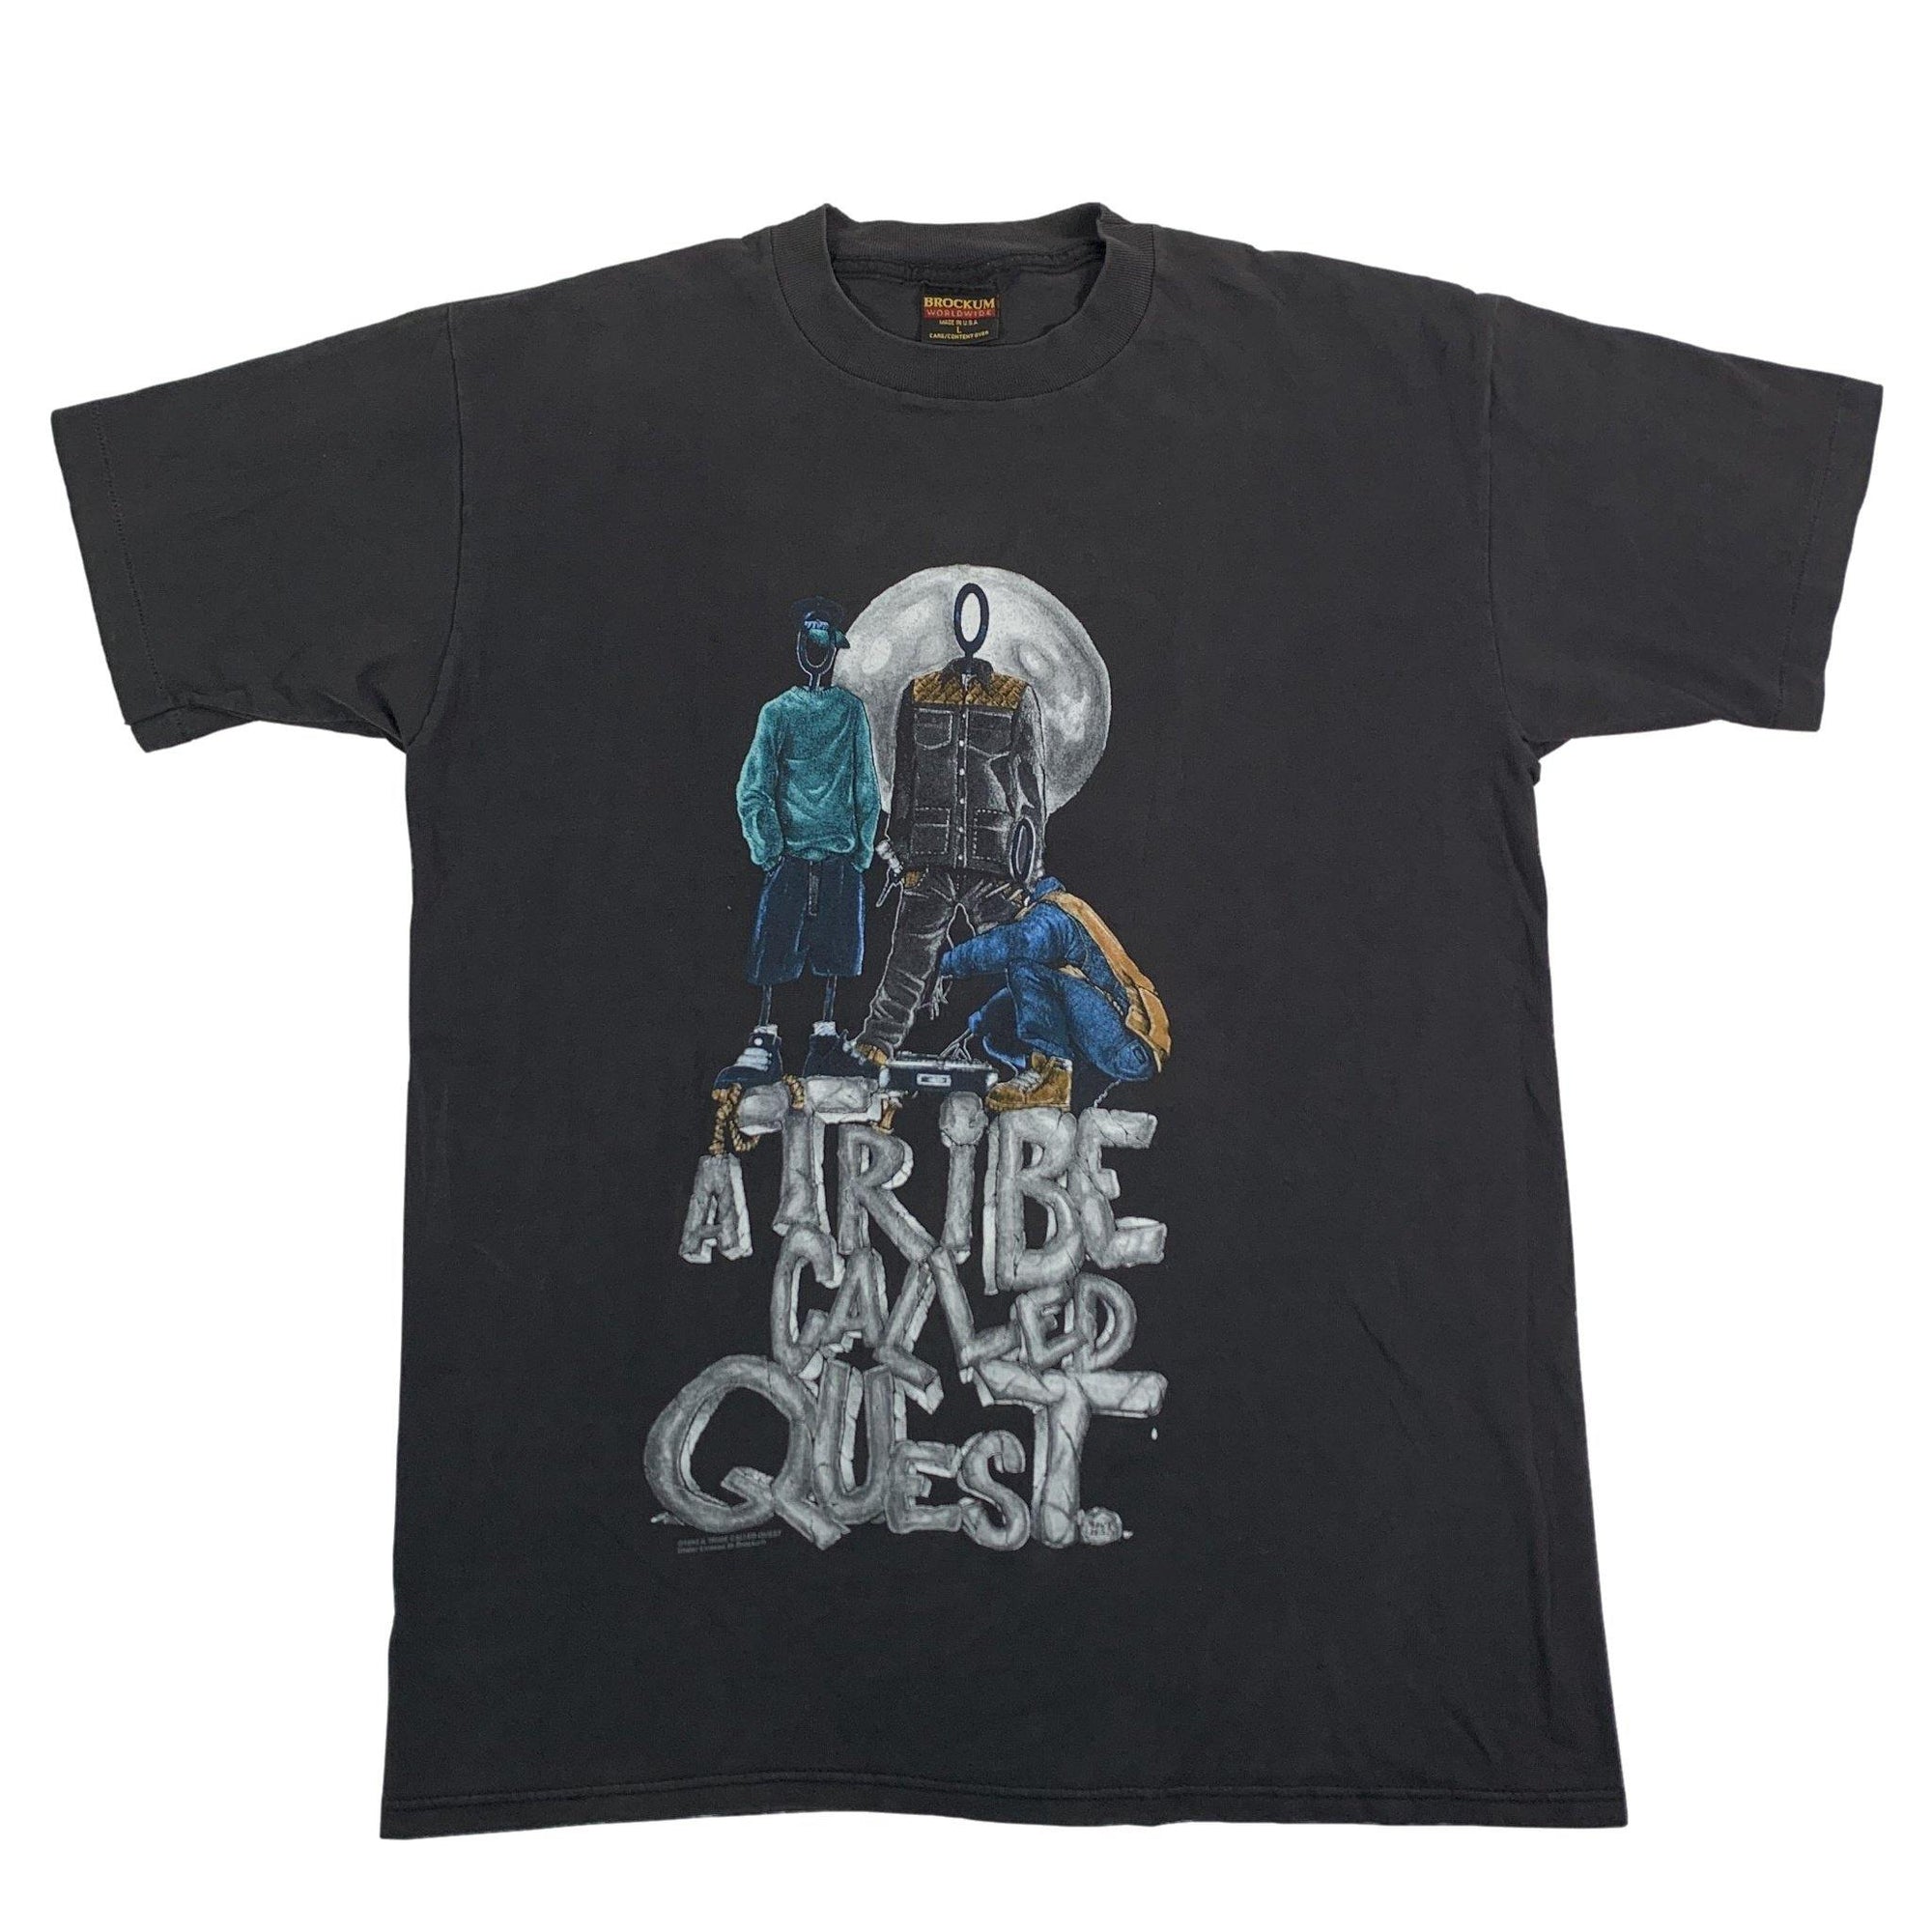 Vintage A Tribe Called Quest "Midnight Marauders" T-Shirt - jointcustodydc